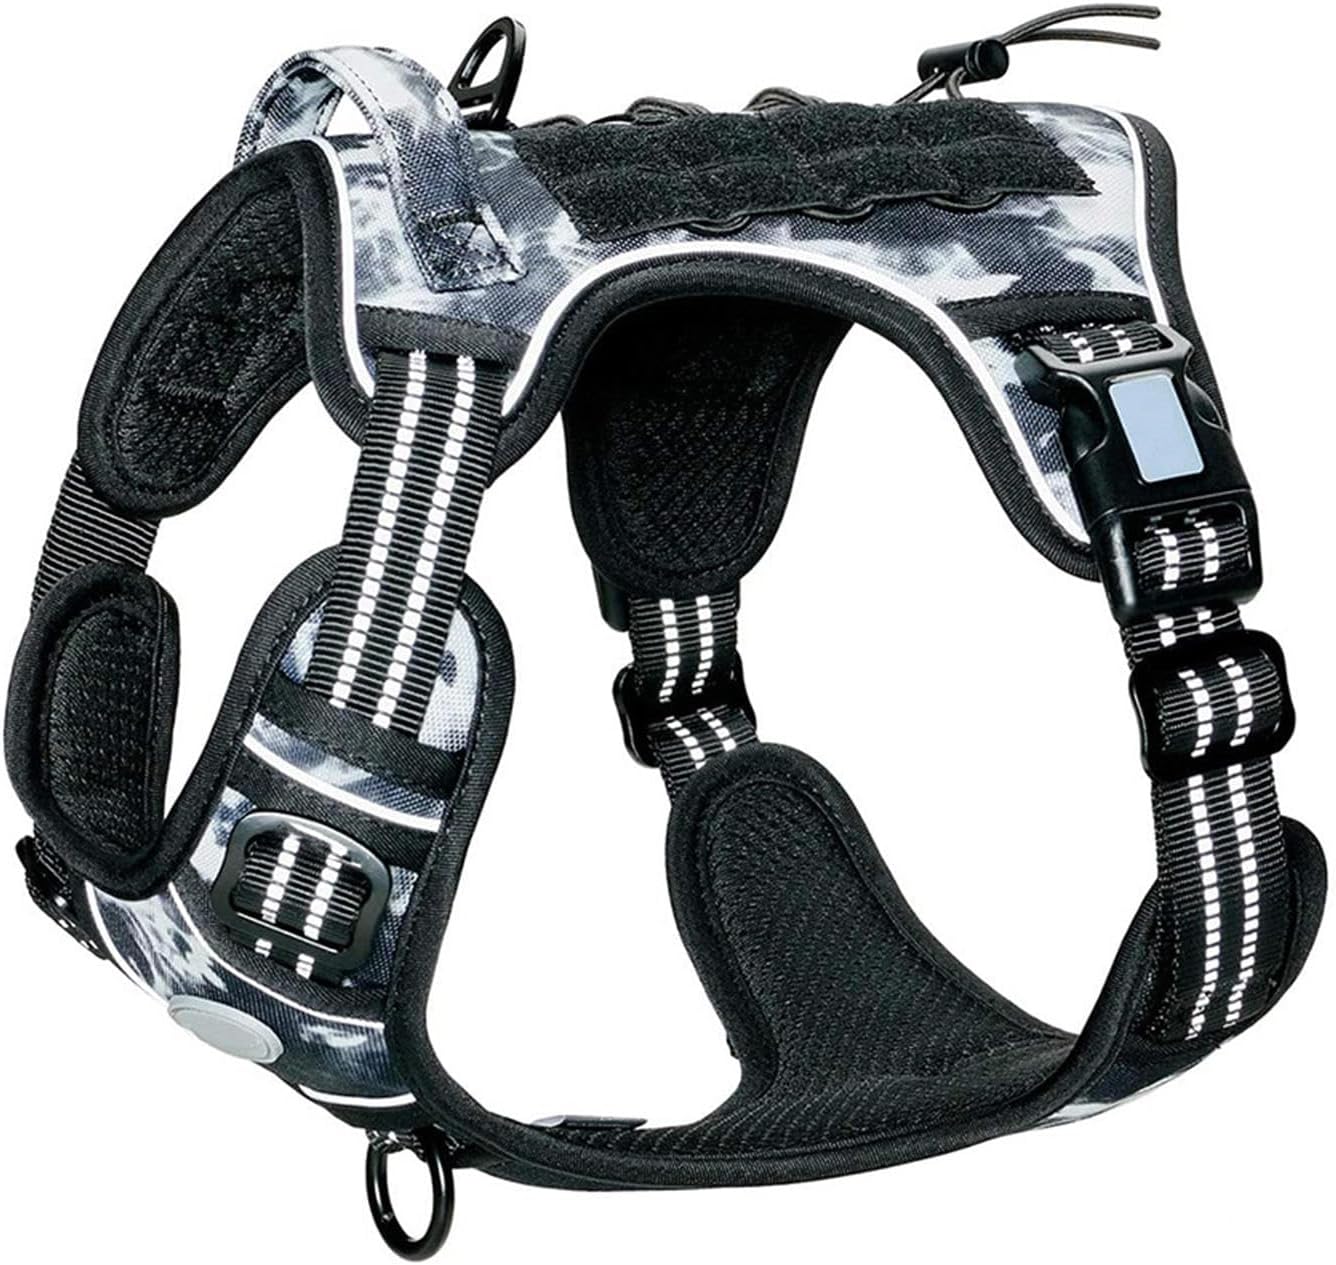 Tactical Anti Pull Dog Harness Adjustable Breathable Pet Vest Harness